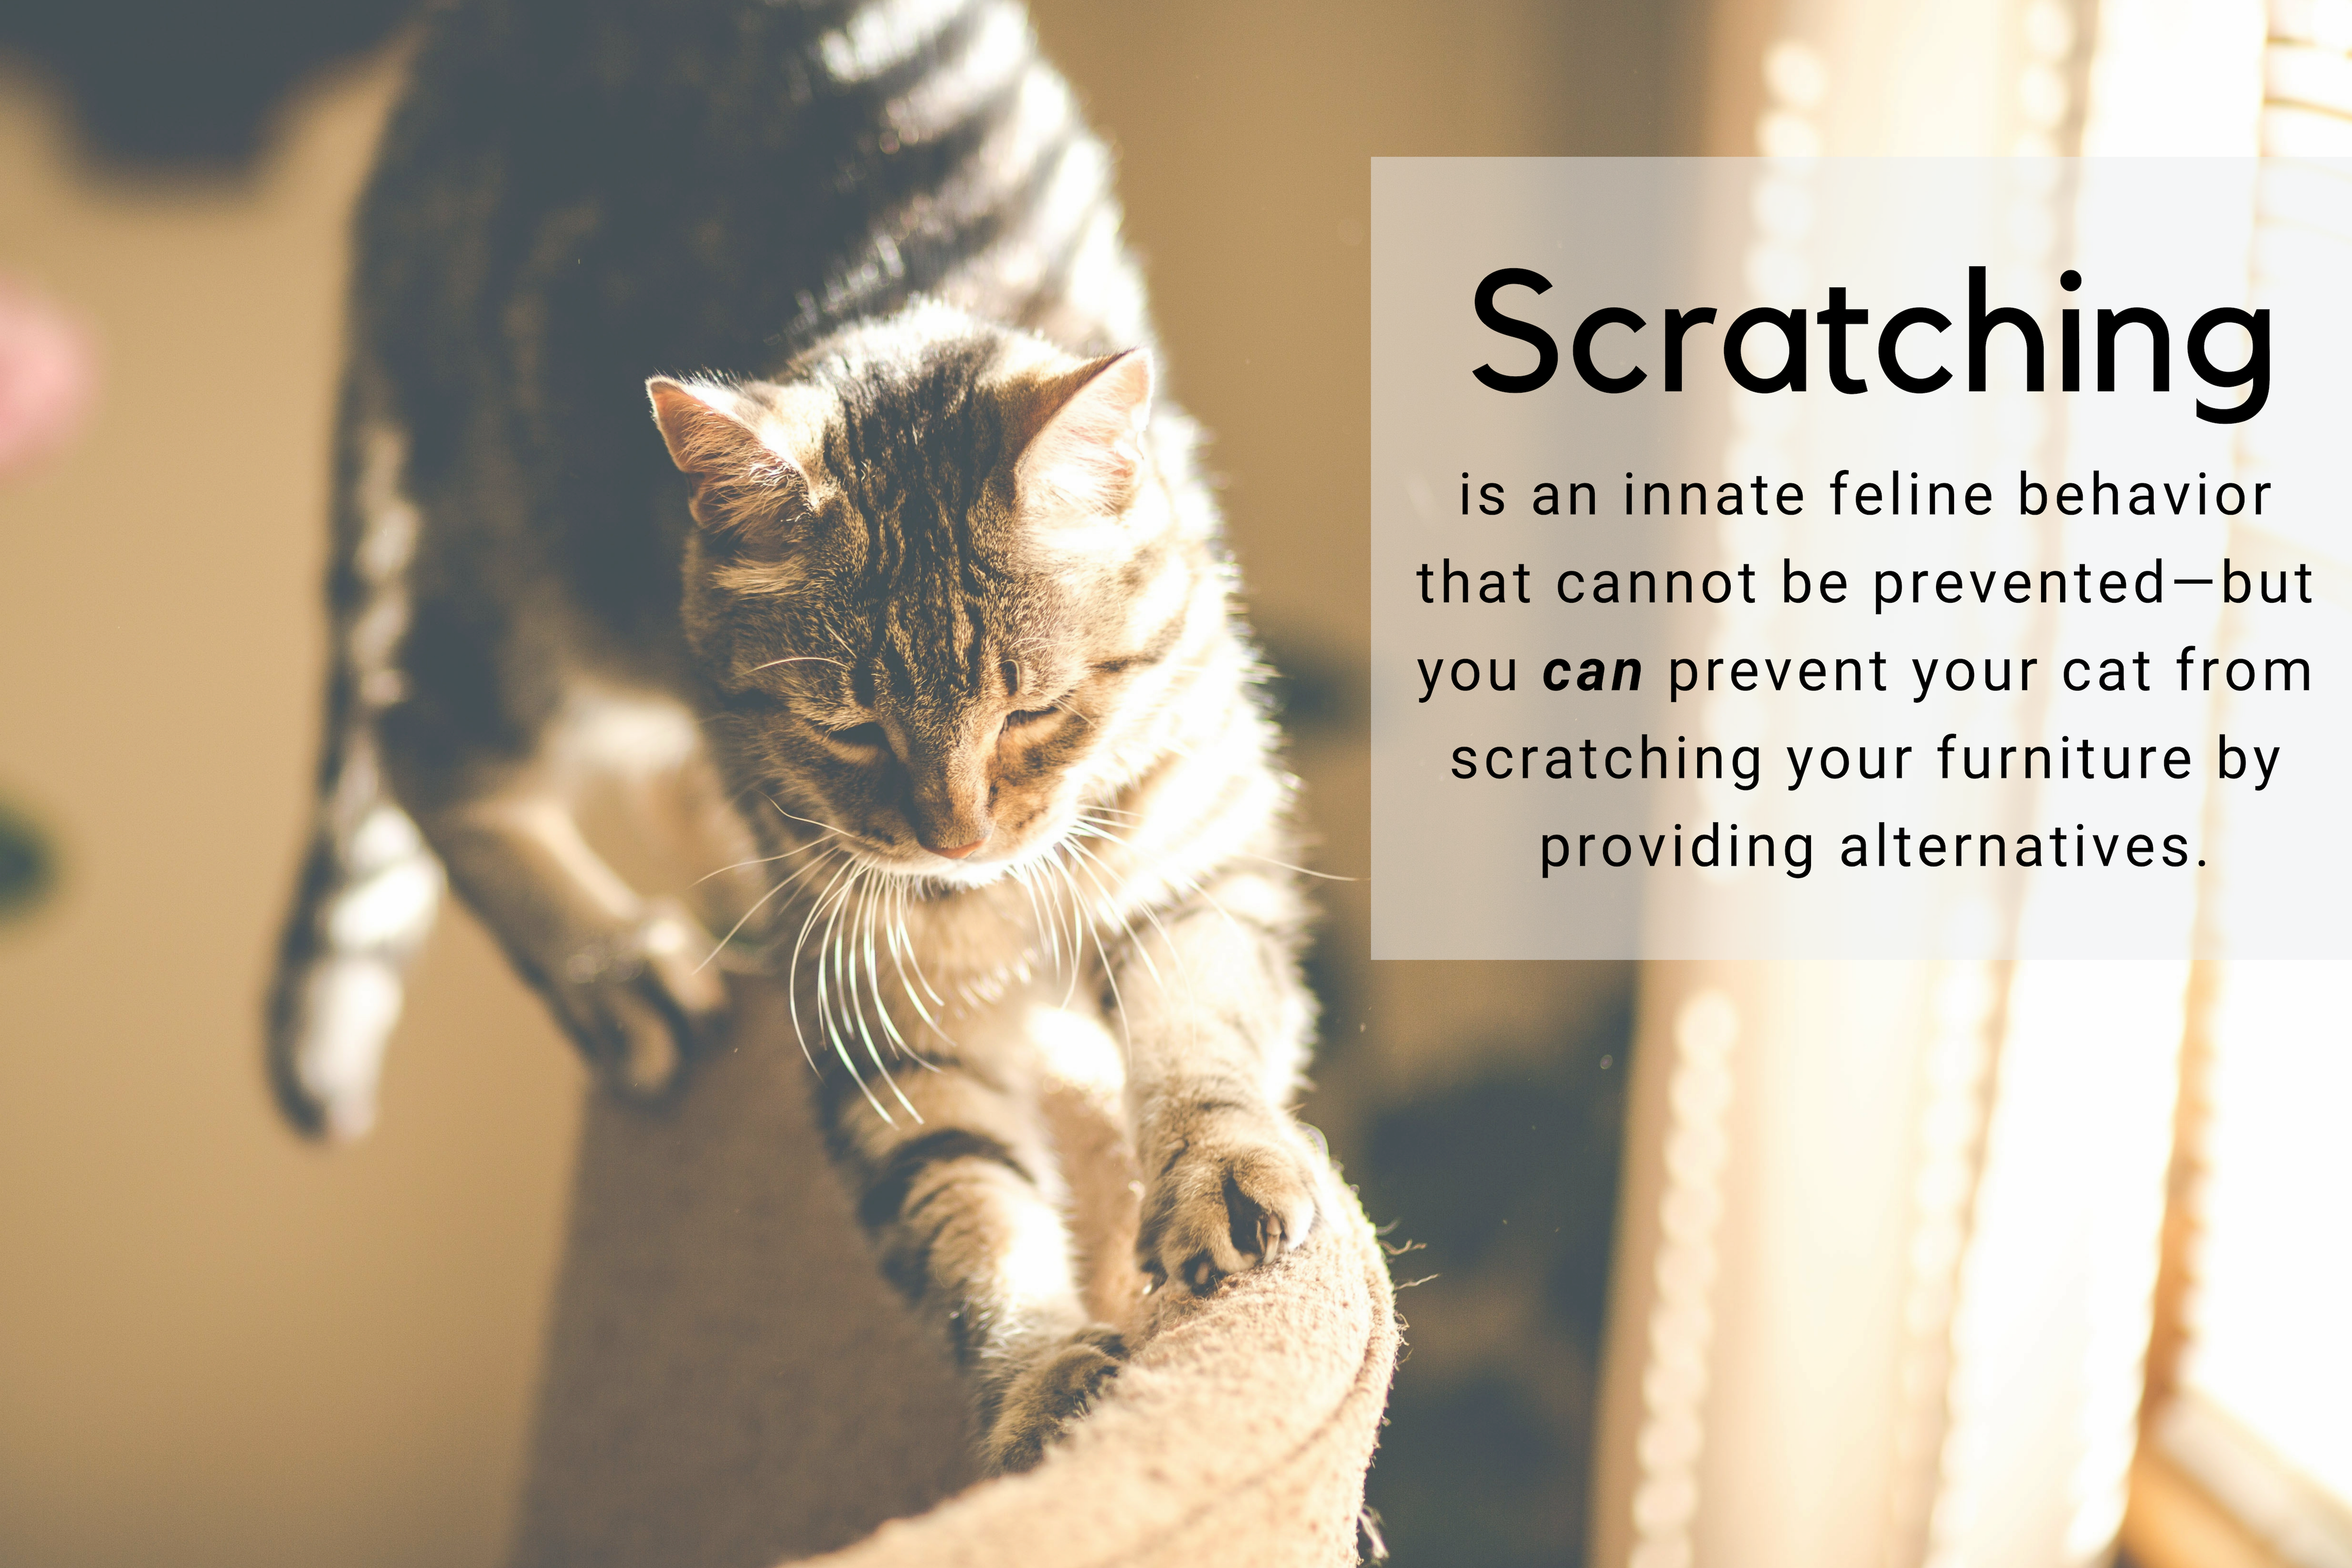 5 Tips to Curb Your Cat's Scratching